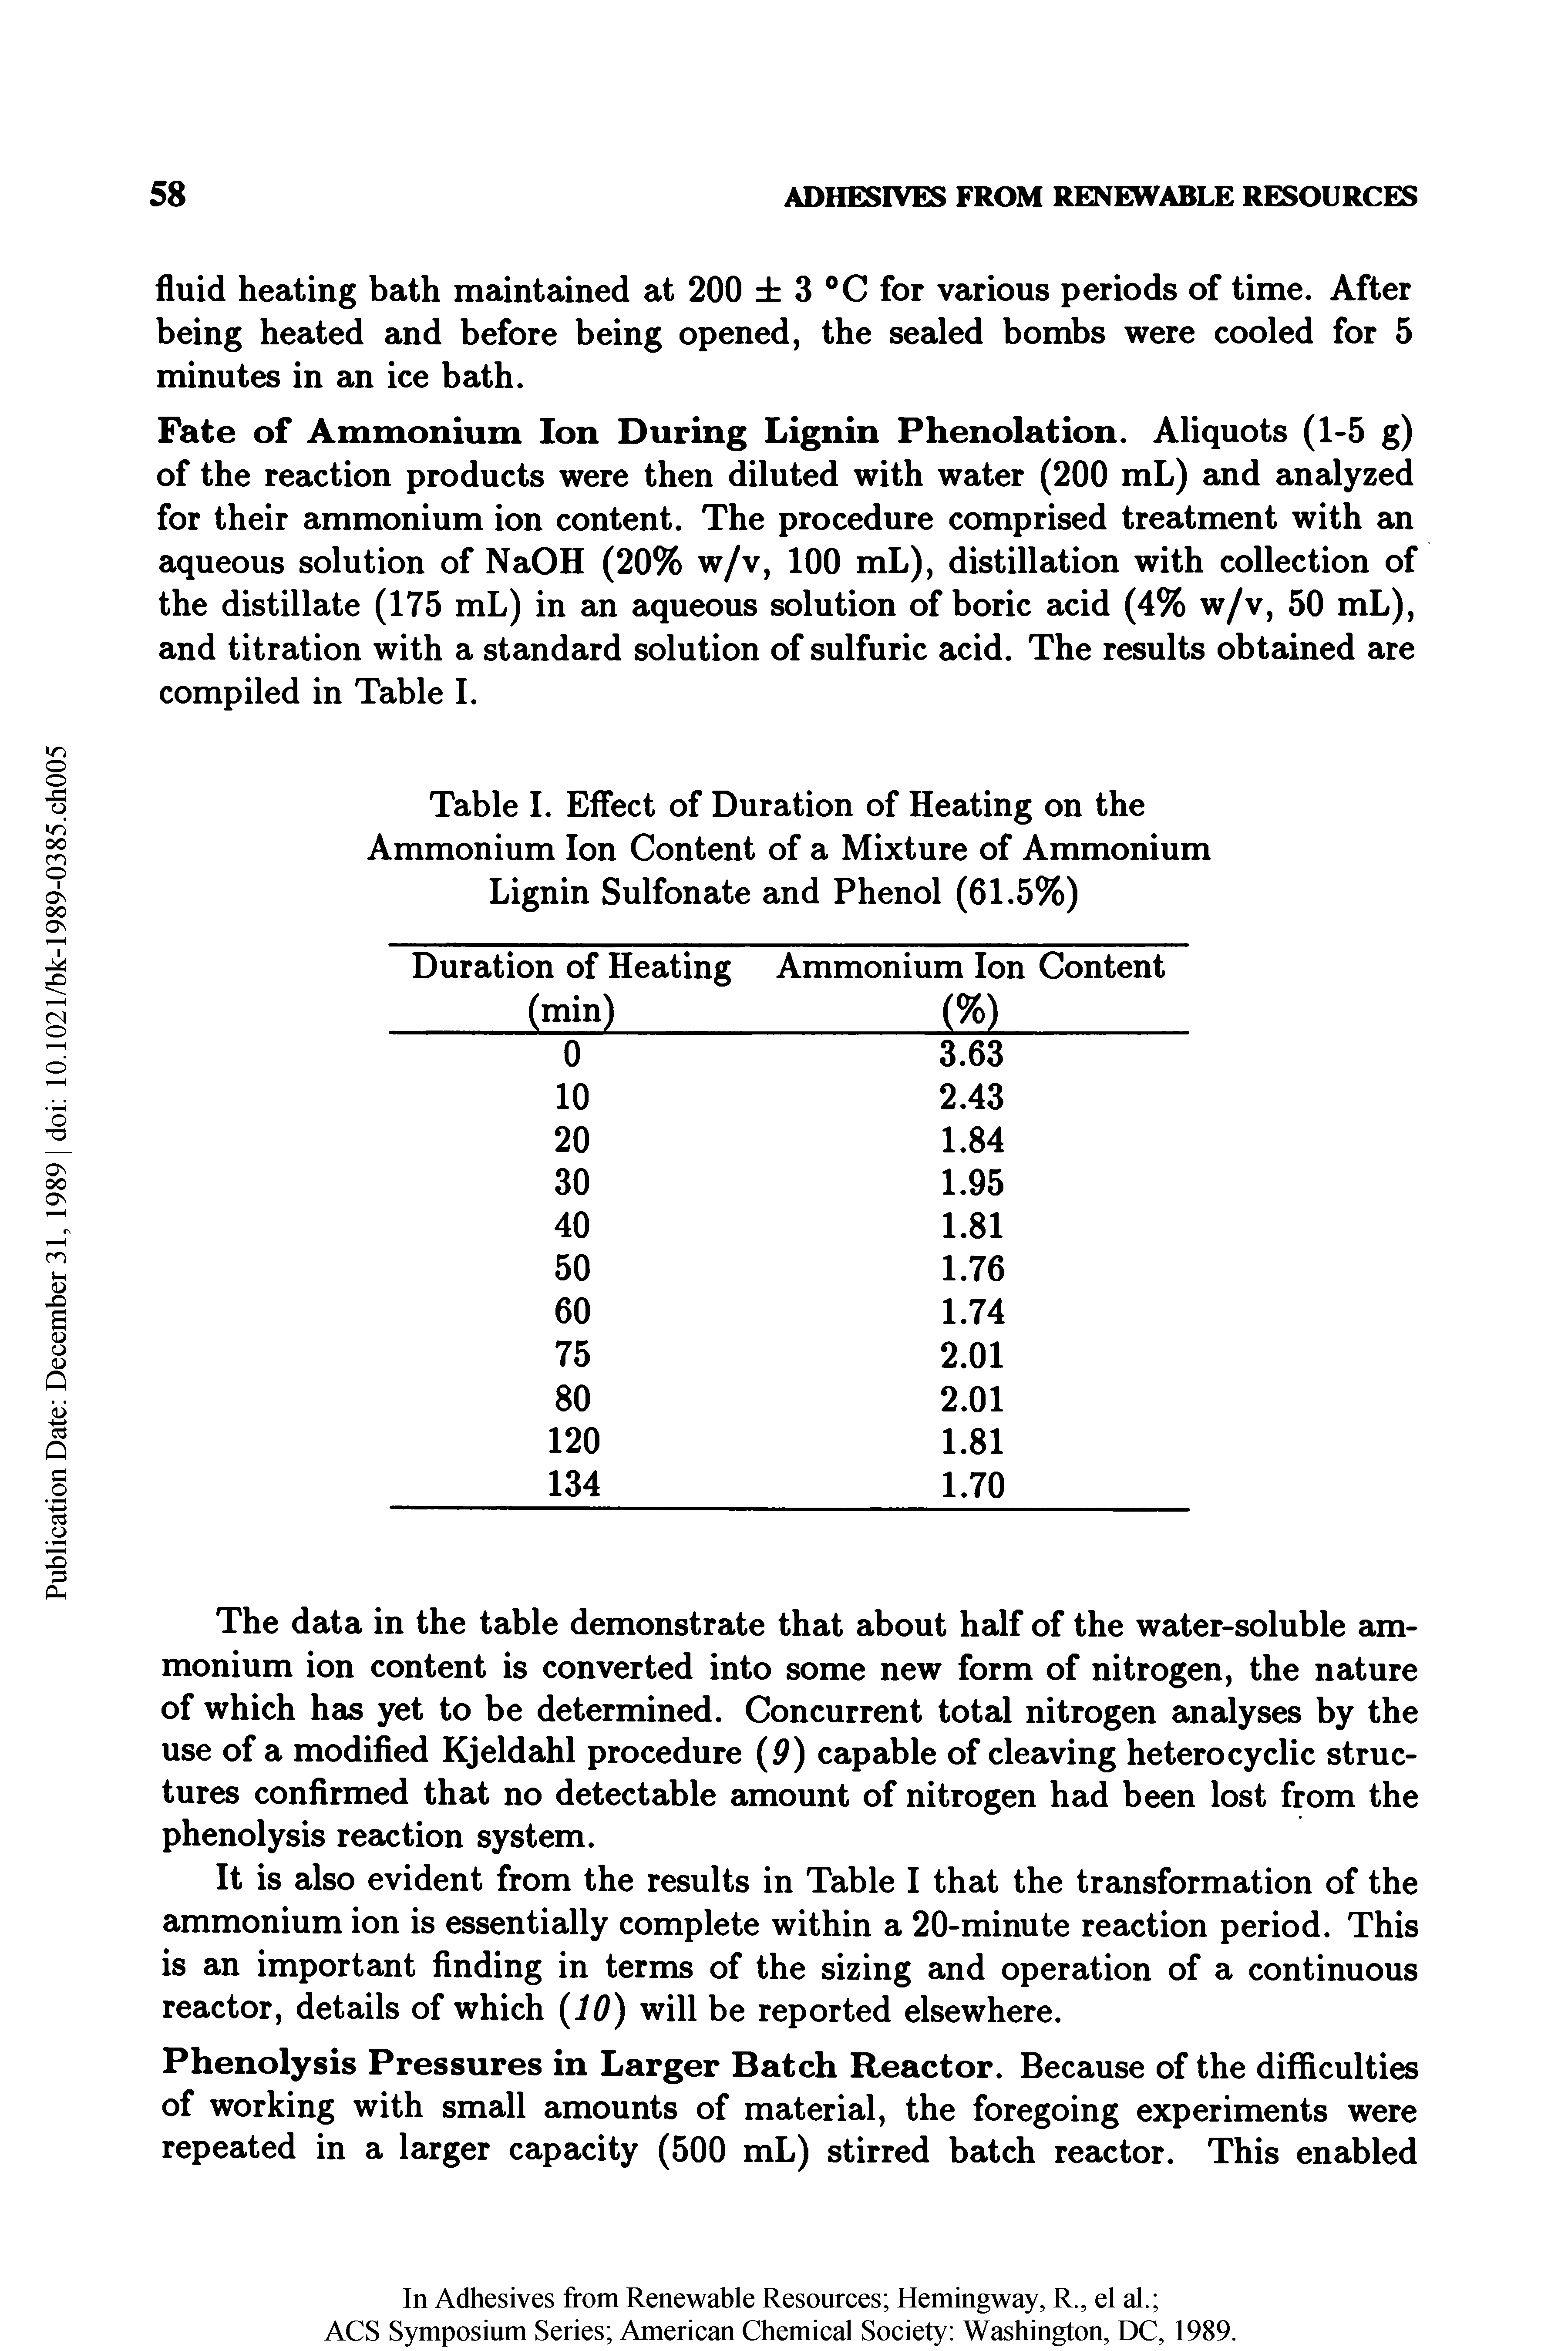 Table I. Effect of Duration of Heating on the Ammonium Ion Content of a Mixture of Ammonium Lignin Sulfonate and Phenol (61.5%)...